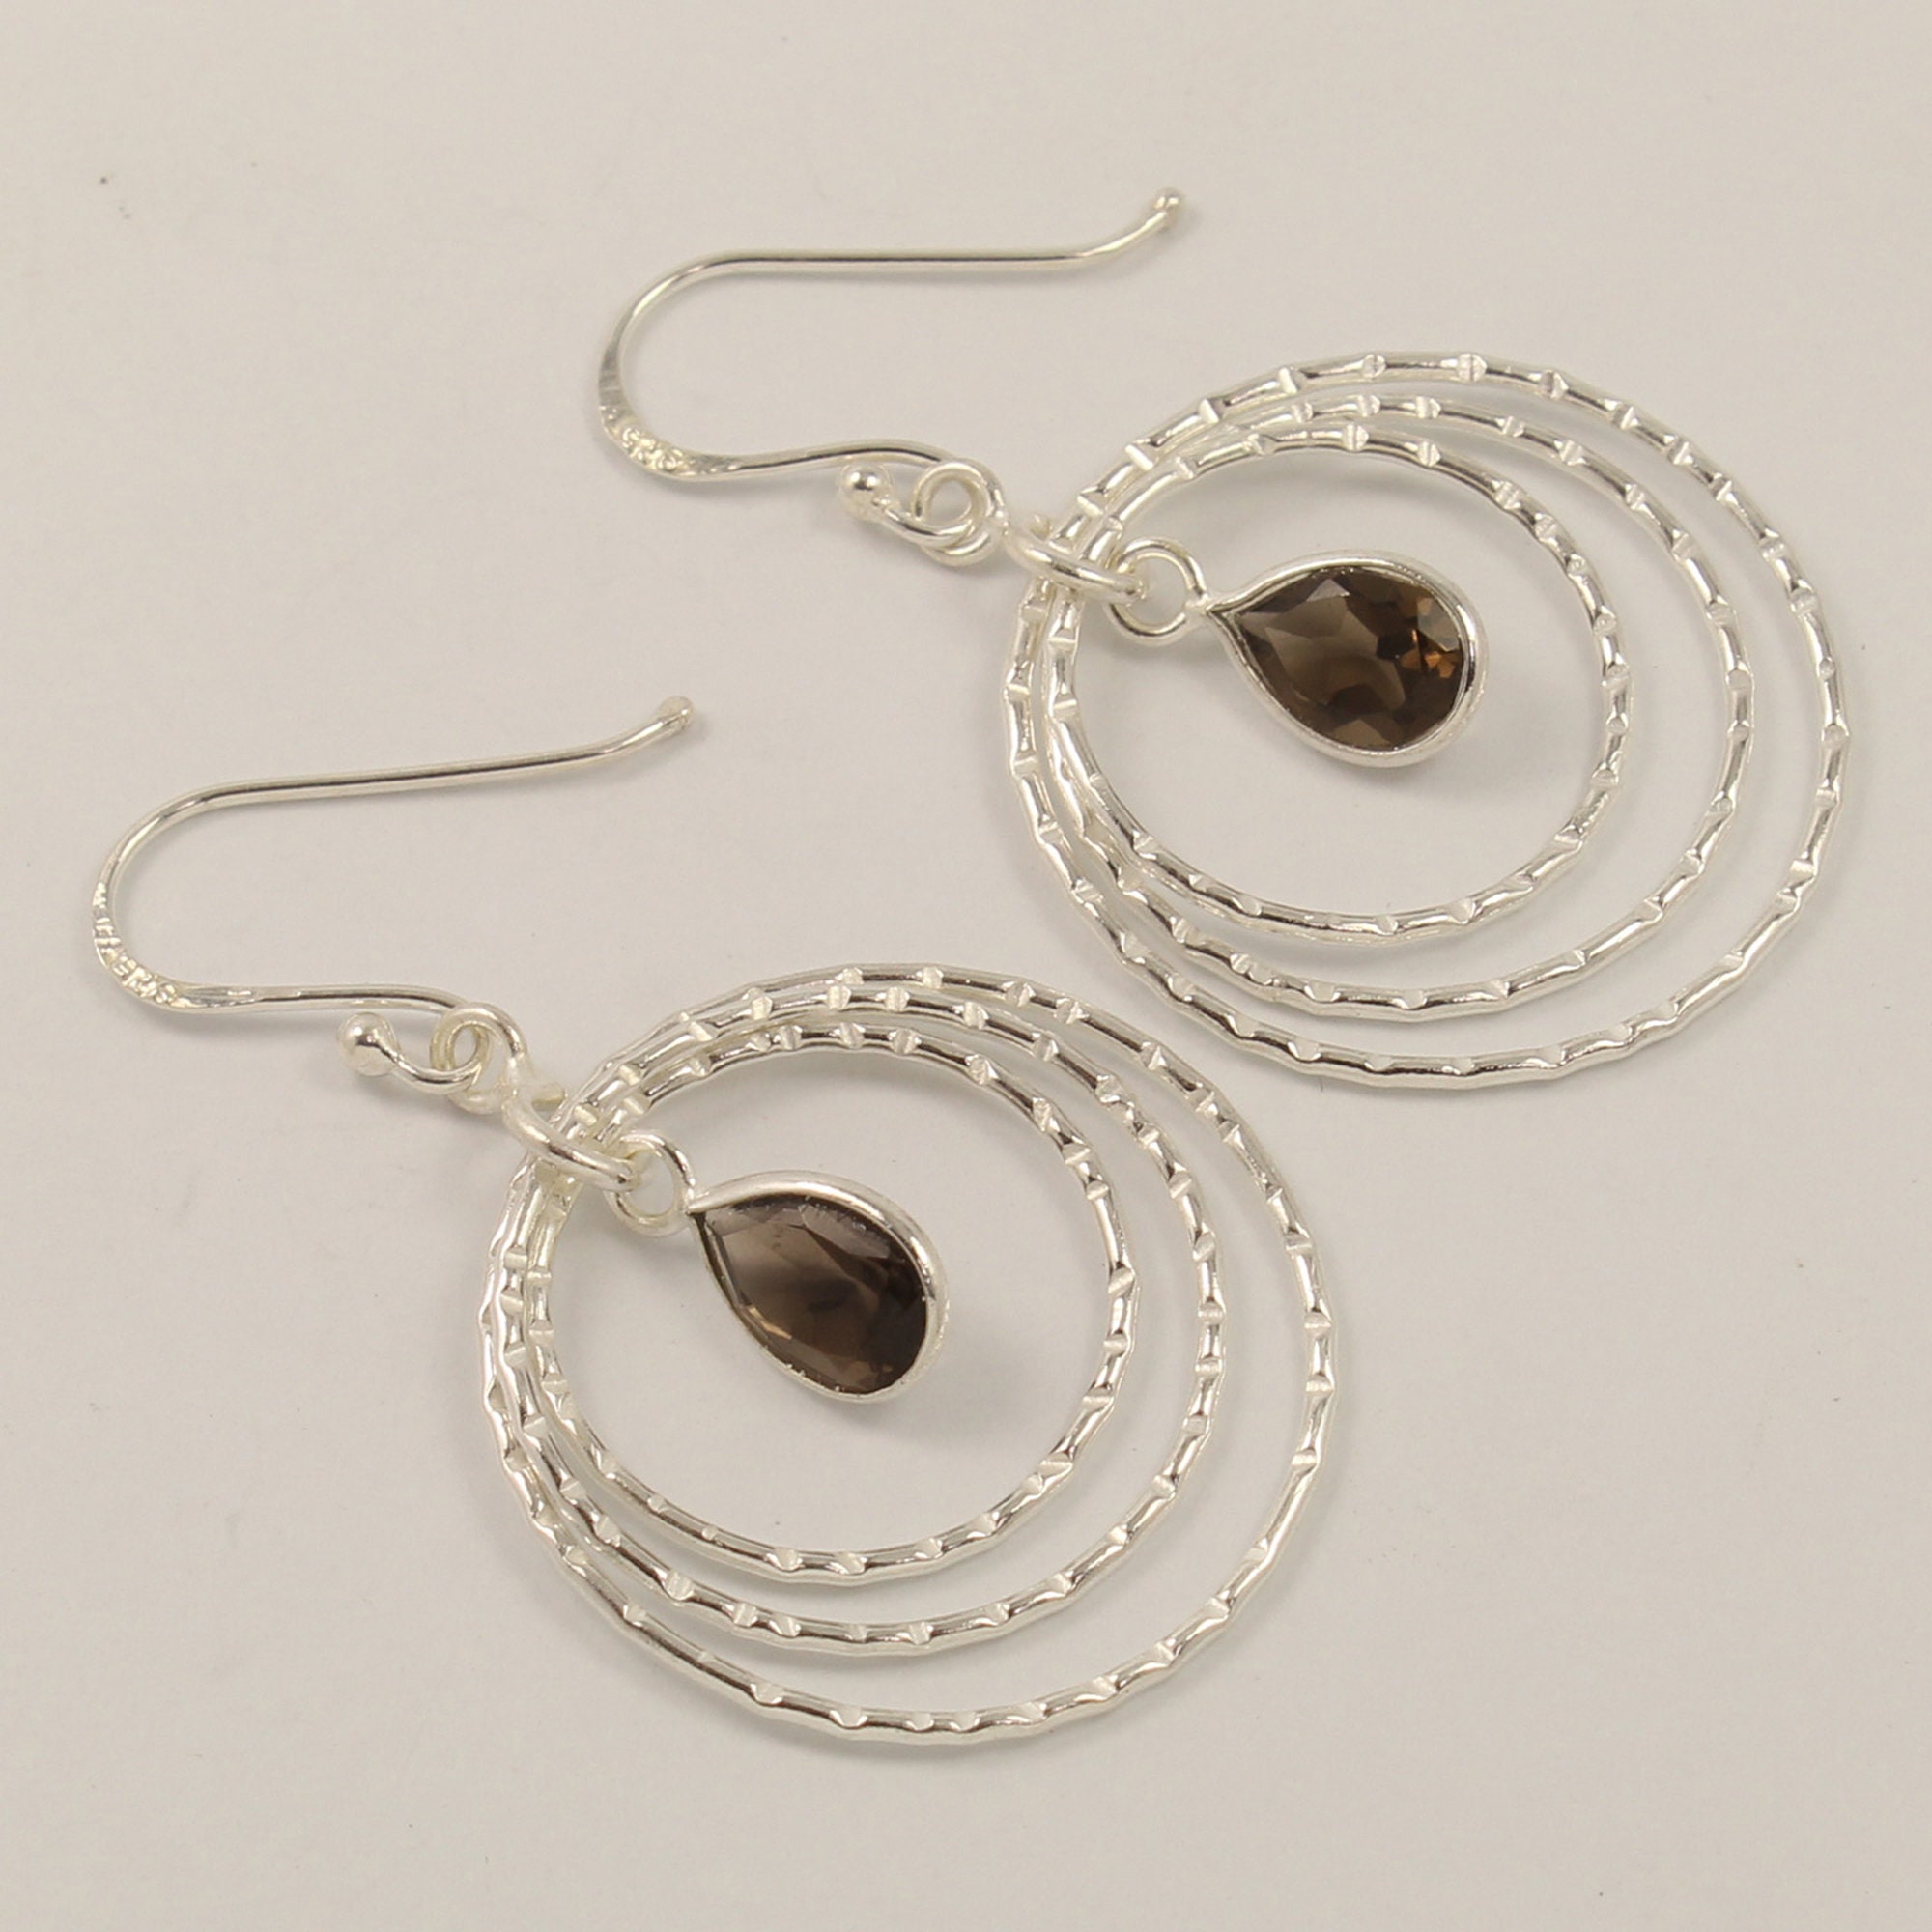 Details about   Smoky Quartz Gemstone 925 Sterling Silver Zigzag Earrings Handmade Jewelry 